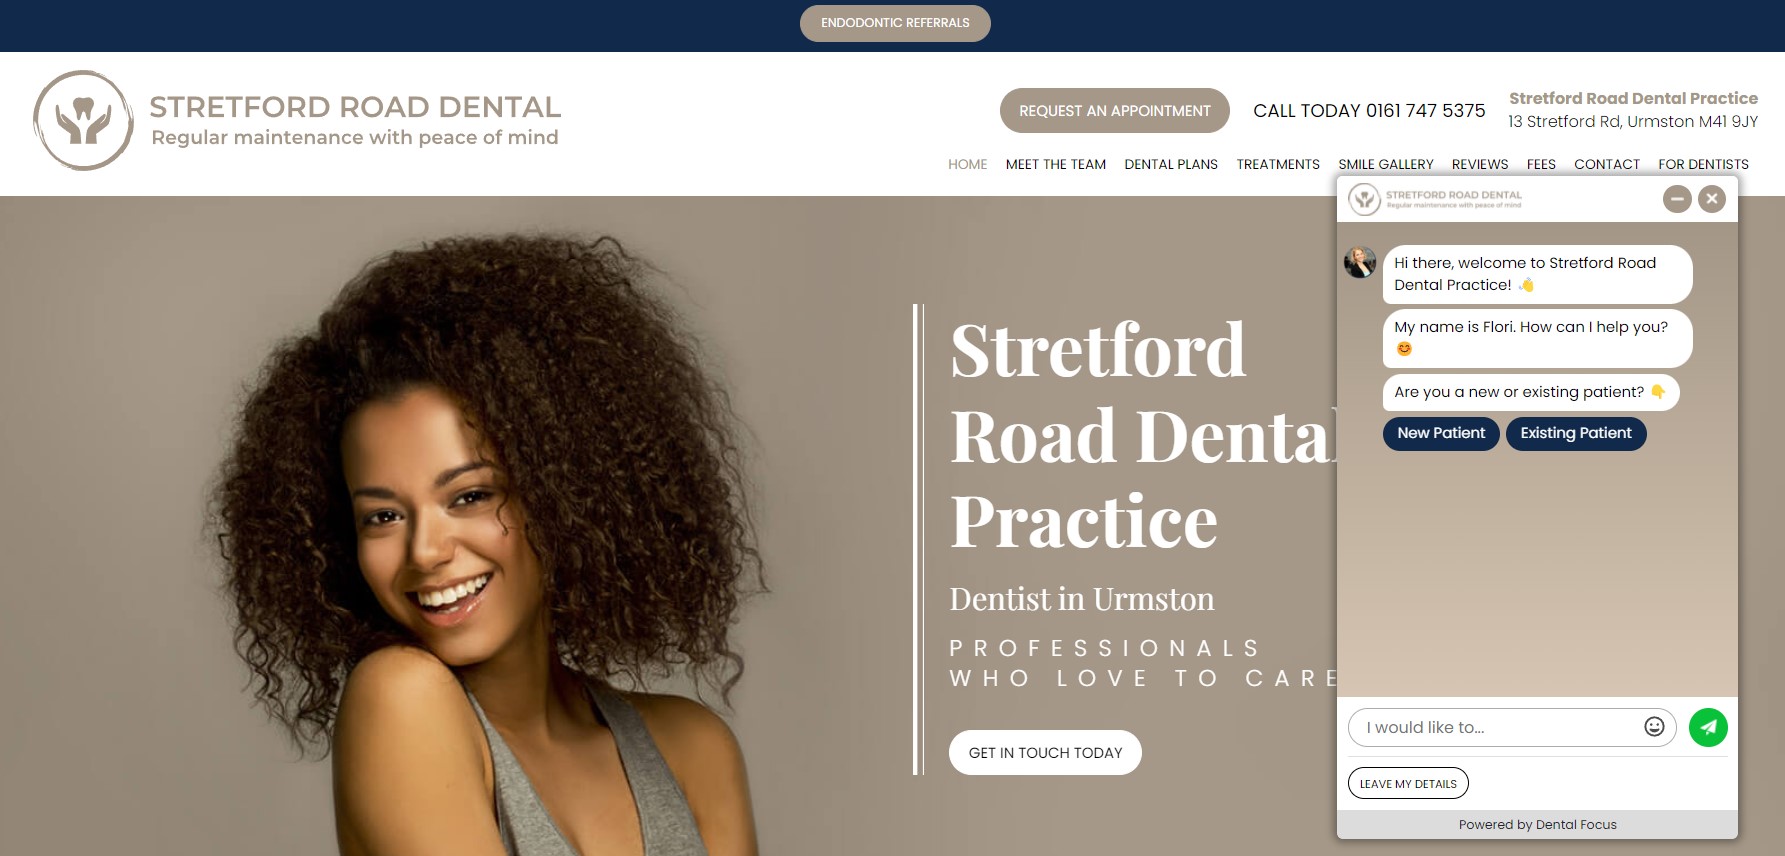 Image shows the homepage for Stretford Road Dental Practice with the Dental Focus Chatbot at the bottom right of the page.